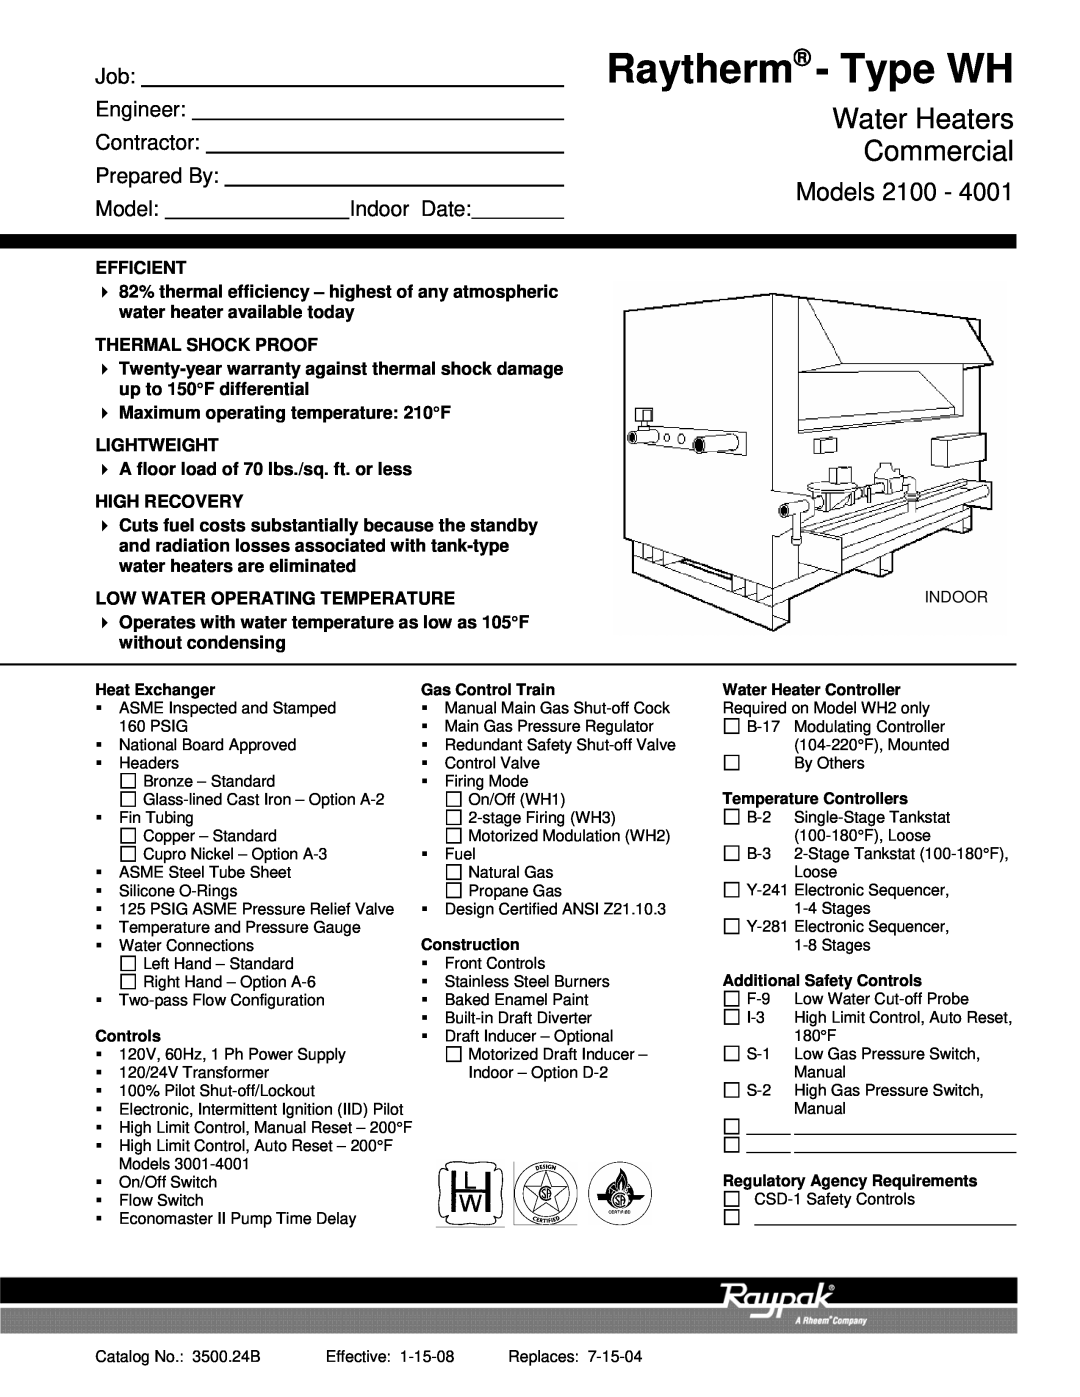 Raypak 2100 - 4001 warranty Raytherm - Type WH, Water Heaters, Commercial, Models, Engineer, Contractor, Prepared By 